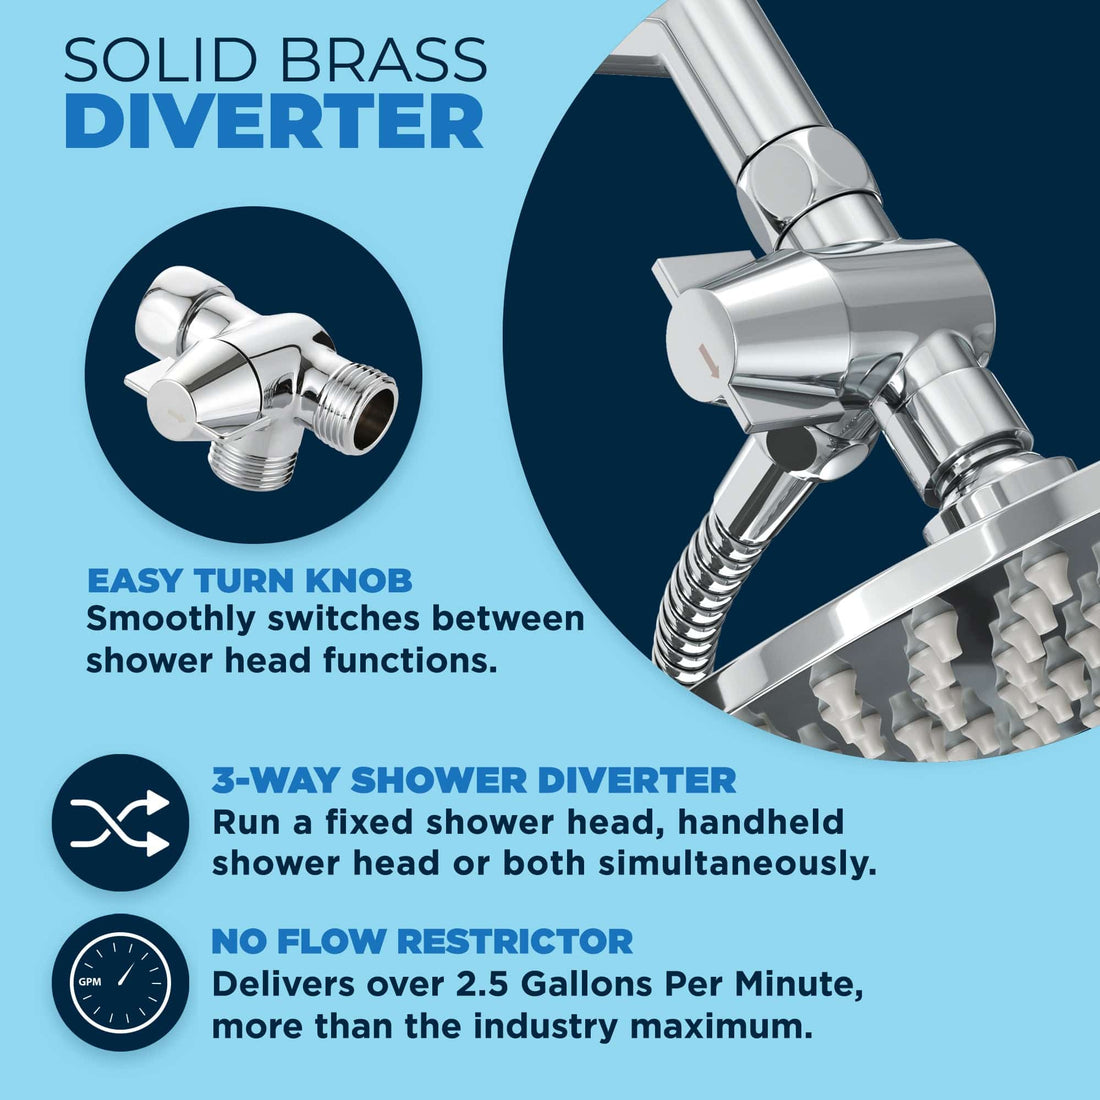 HammerHead Showers Metal Dual Shower Head Combo Solid Brass Diverter - Chrome - The Shower Head Store